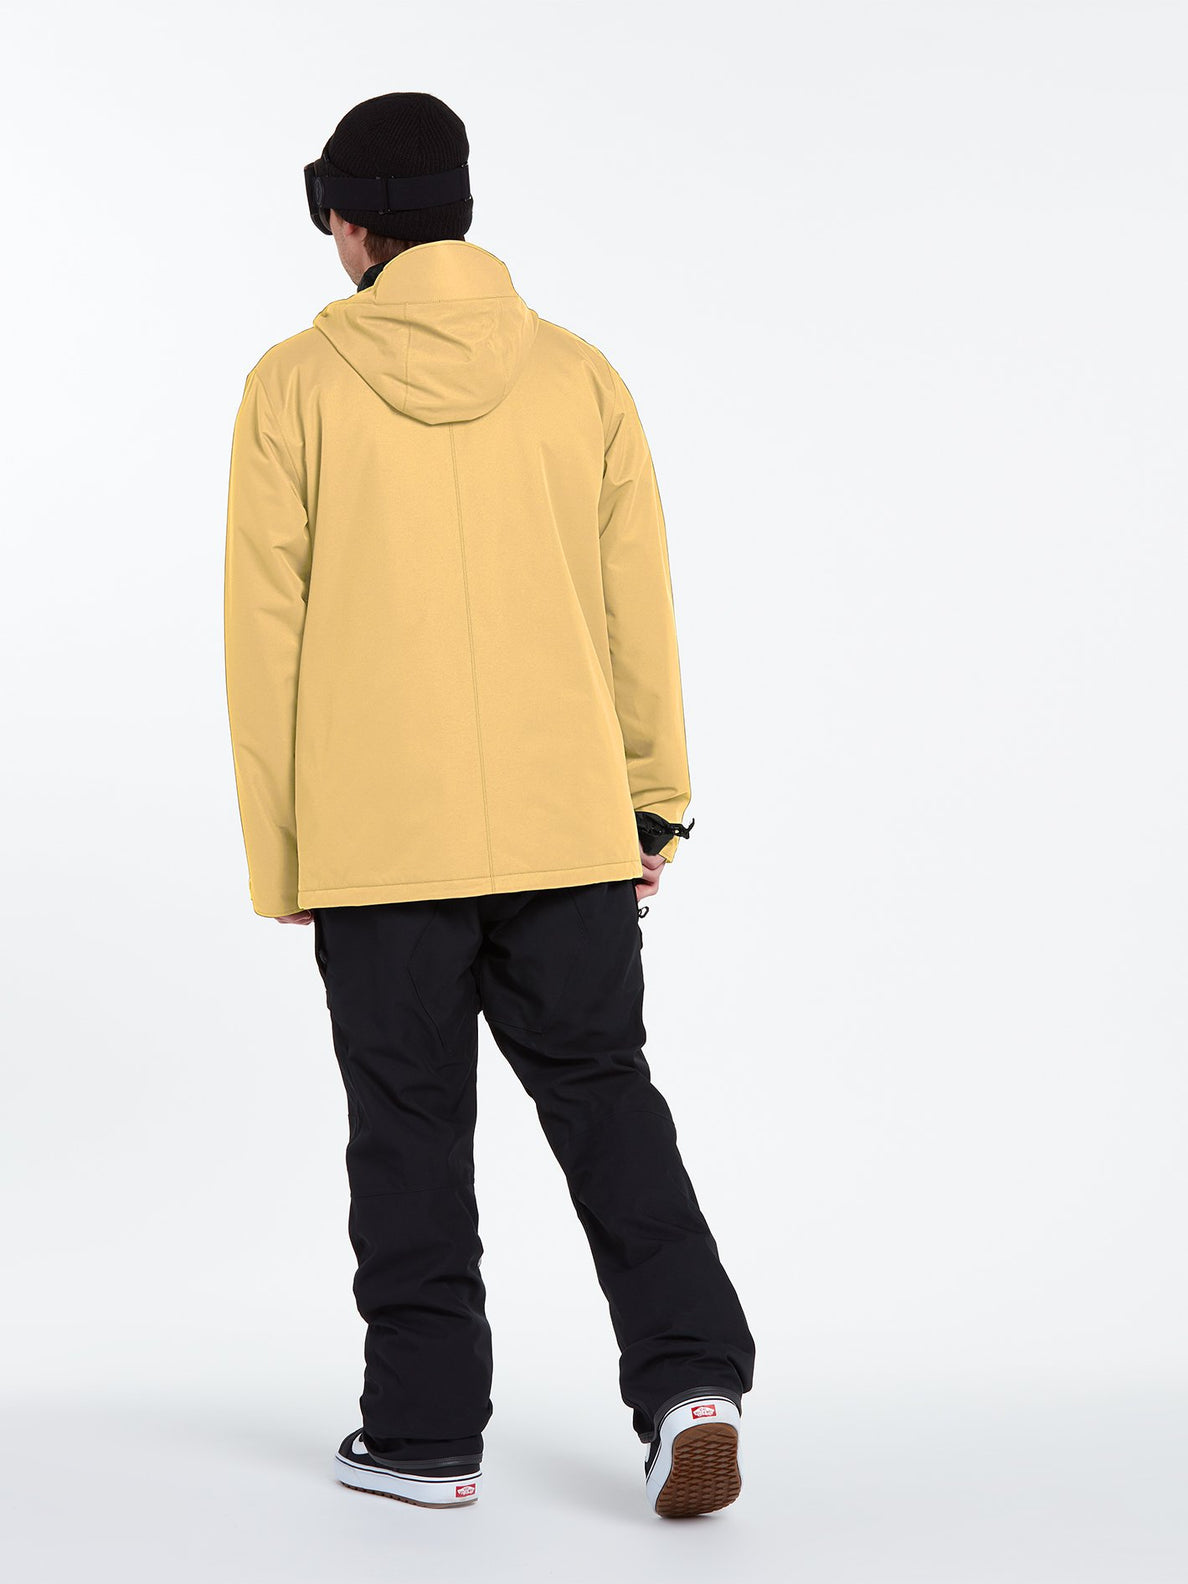 17Forty Insulated Jacket - GOLD (G0452114_GLD) [5]